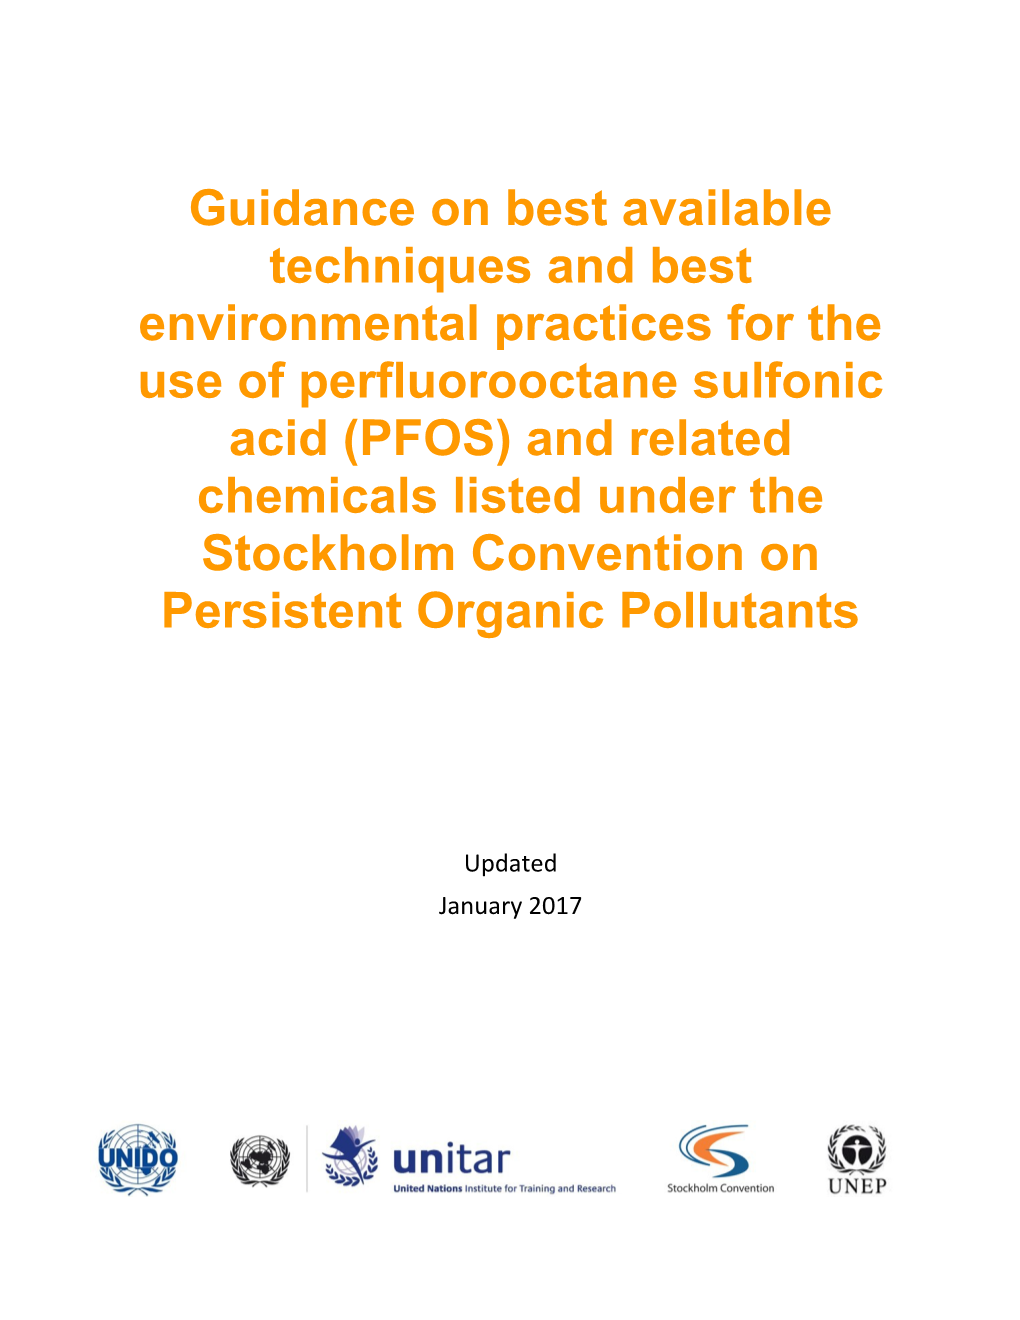 Guidance on Best Available Techniques and Best Environmental Practices for the Use Of